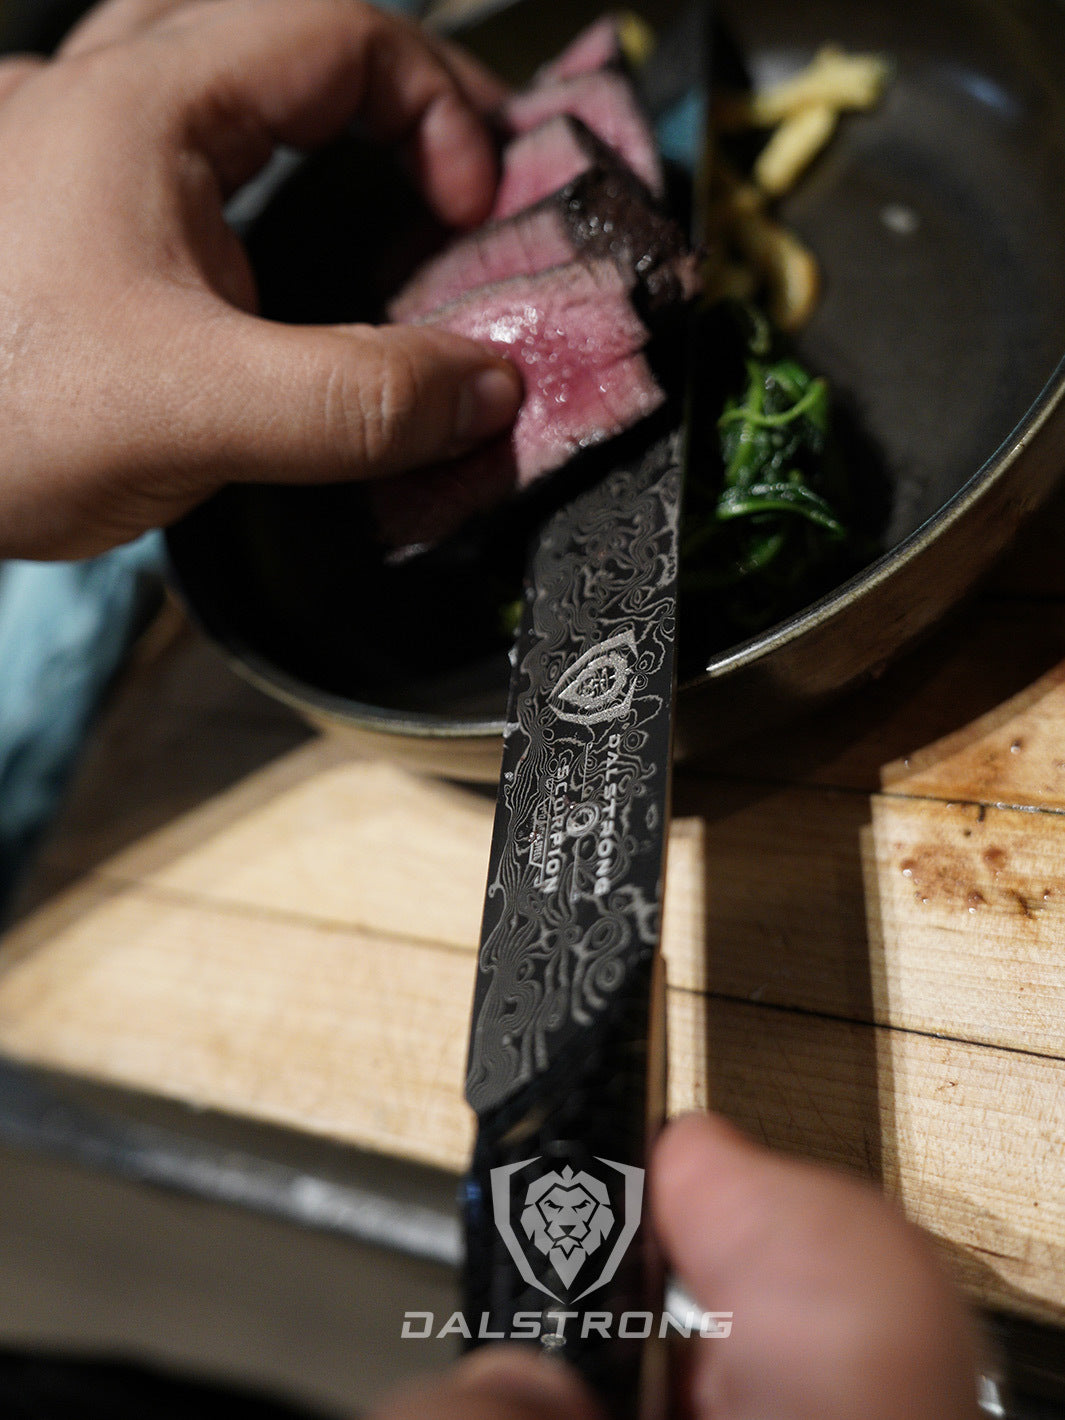 A man holding the Dalstrong scorpion series 11 inch slicing knife with red handle and slices of steak.